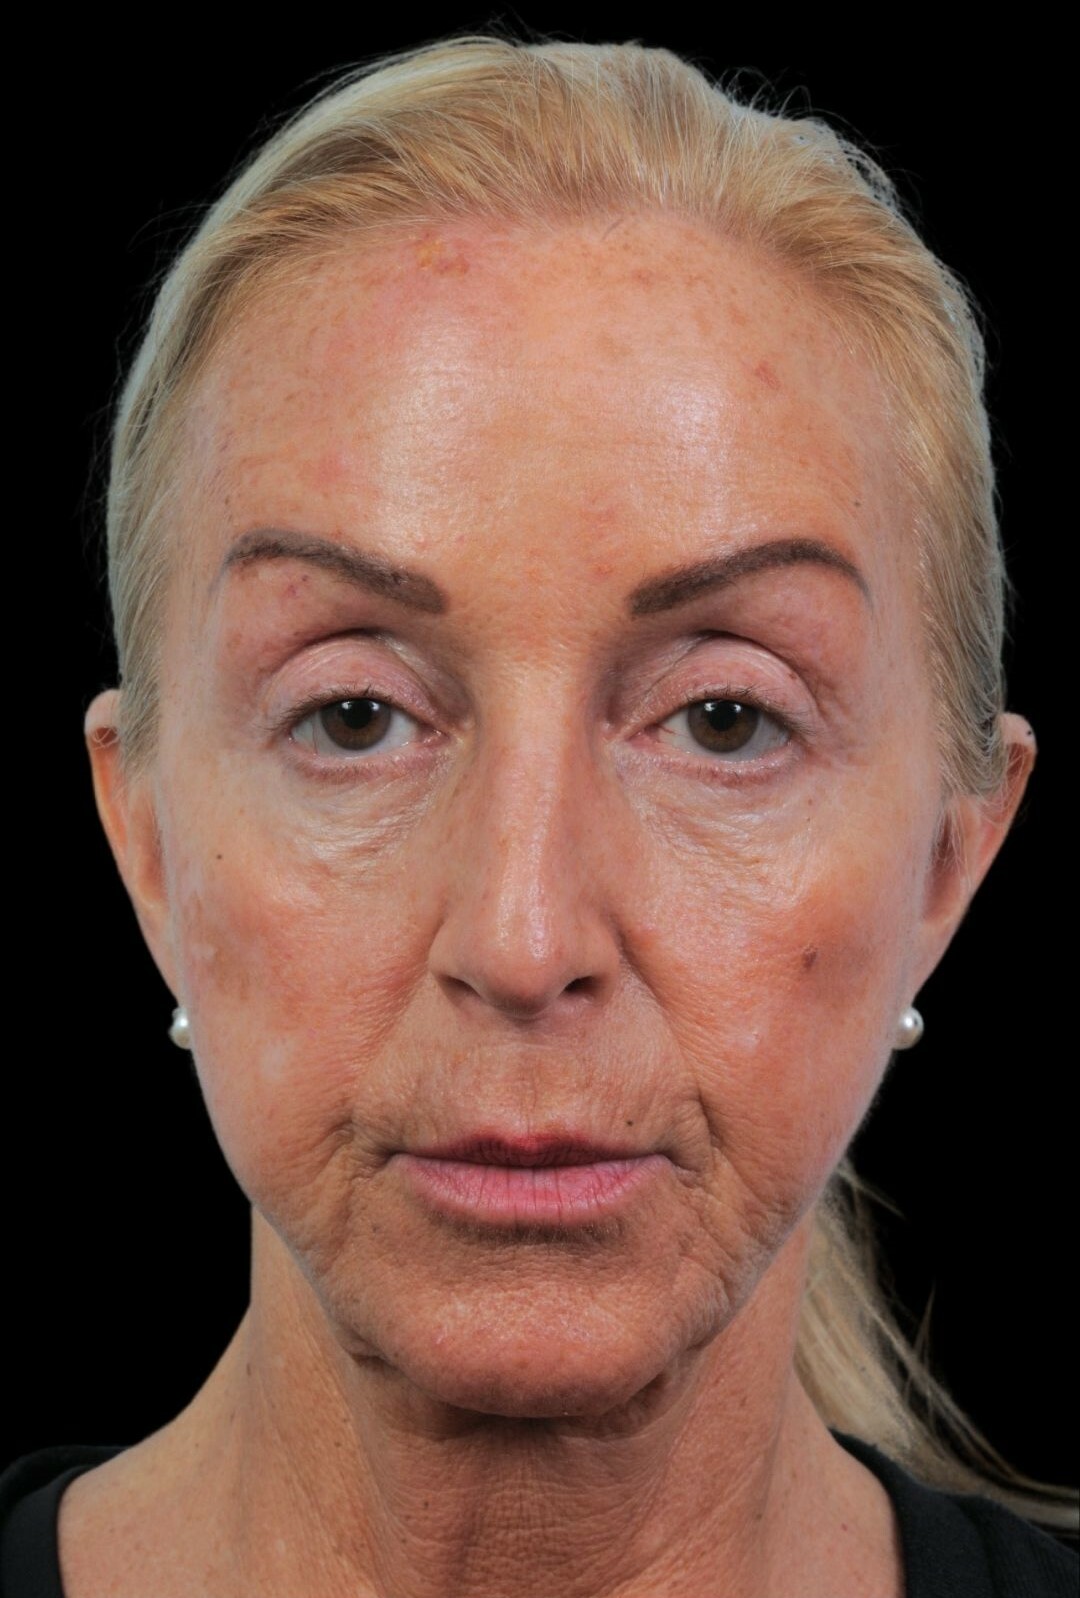 Photo of the patient’s face before the Rhinoplasty surgery. Patient 17 - Set 2